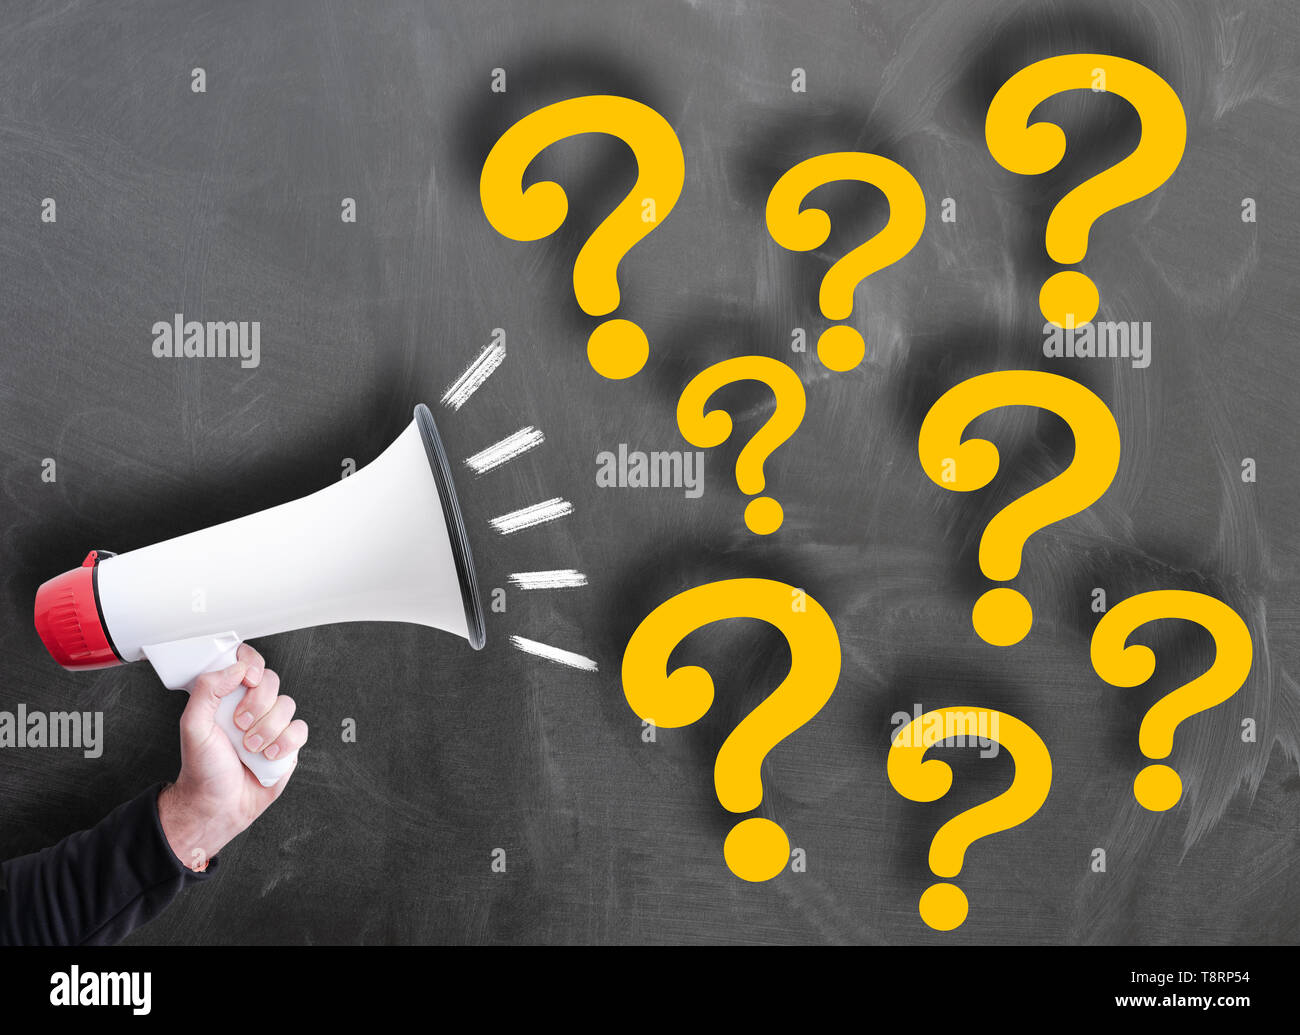 shouting out questions using a megaphone against chalkboard Stock Photo